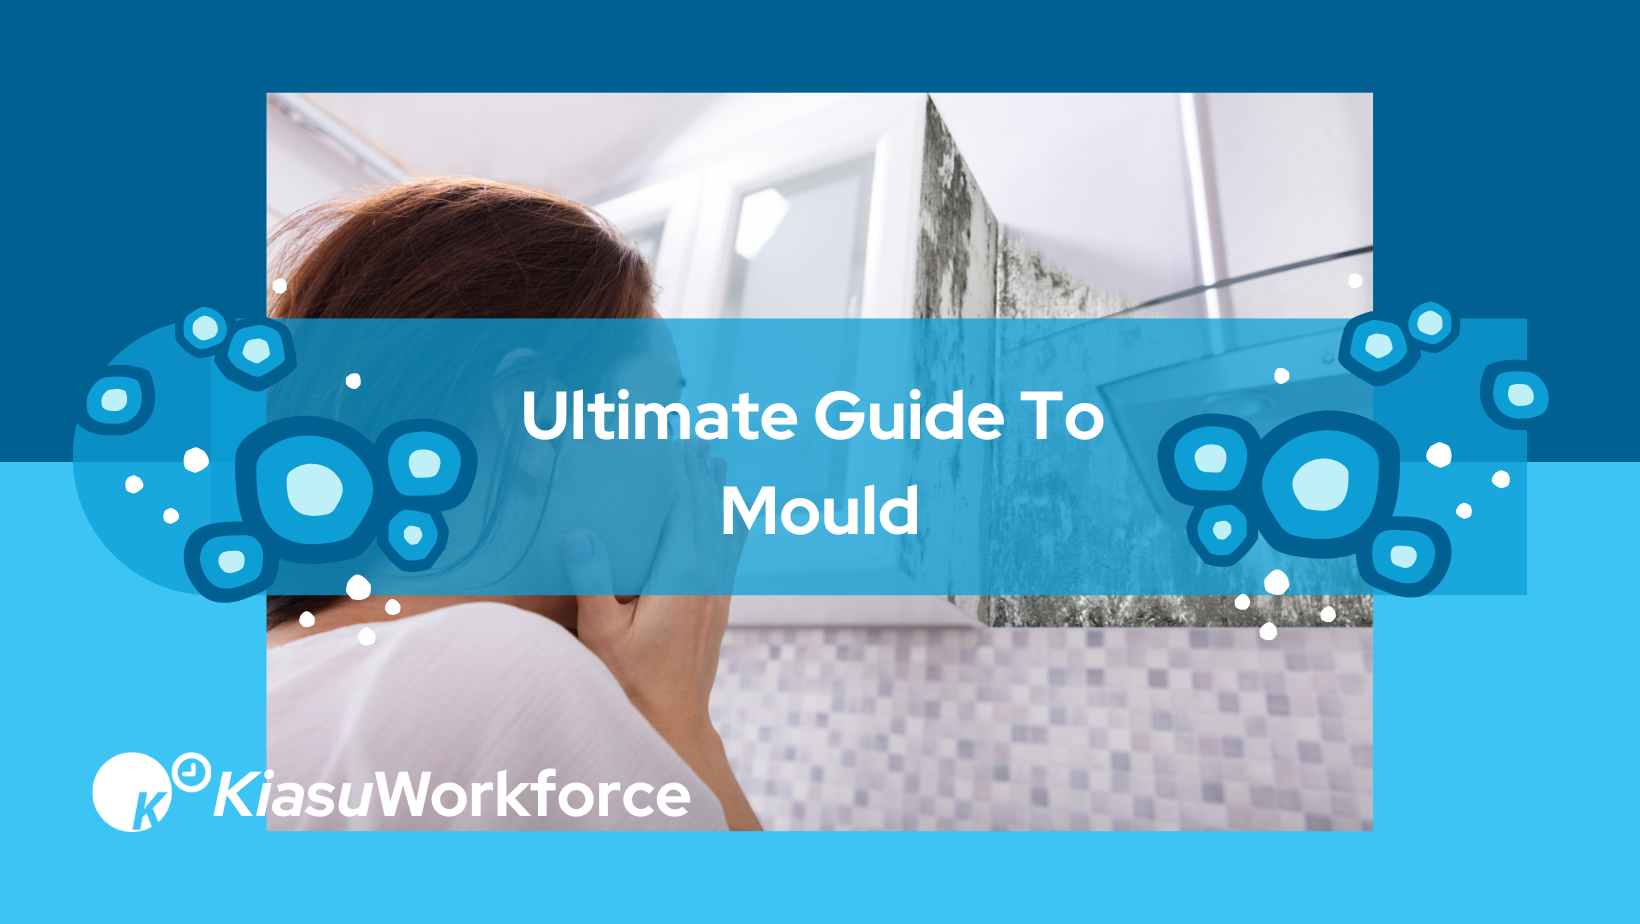 Ultimate Guide To Mould